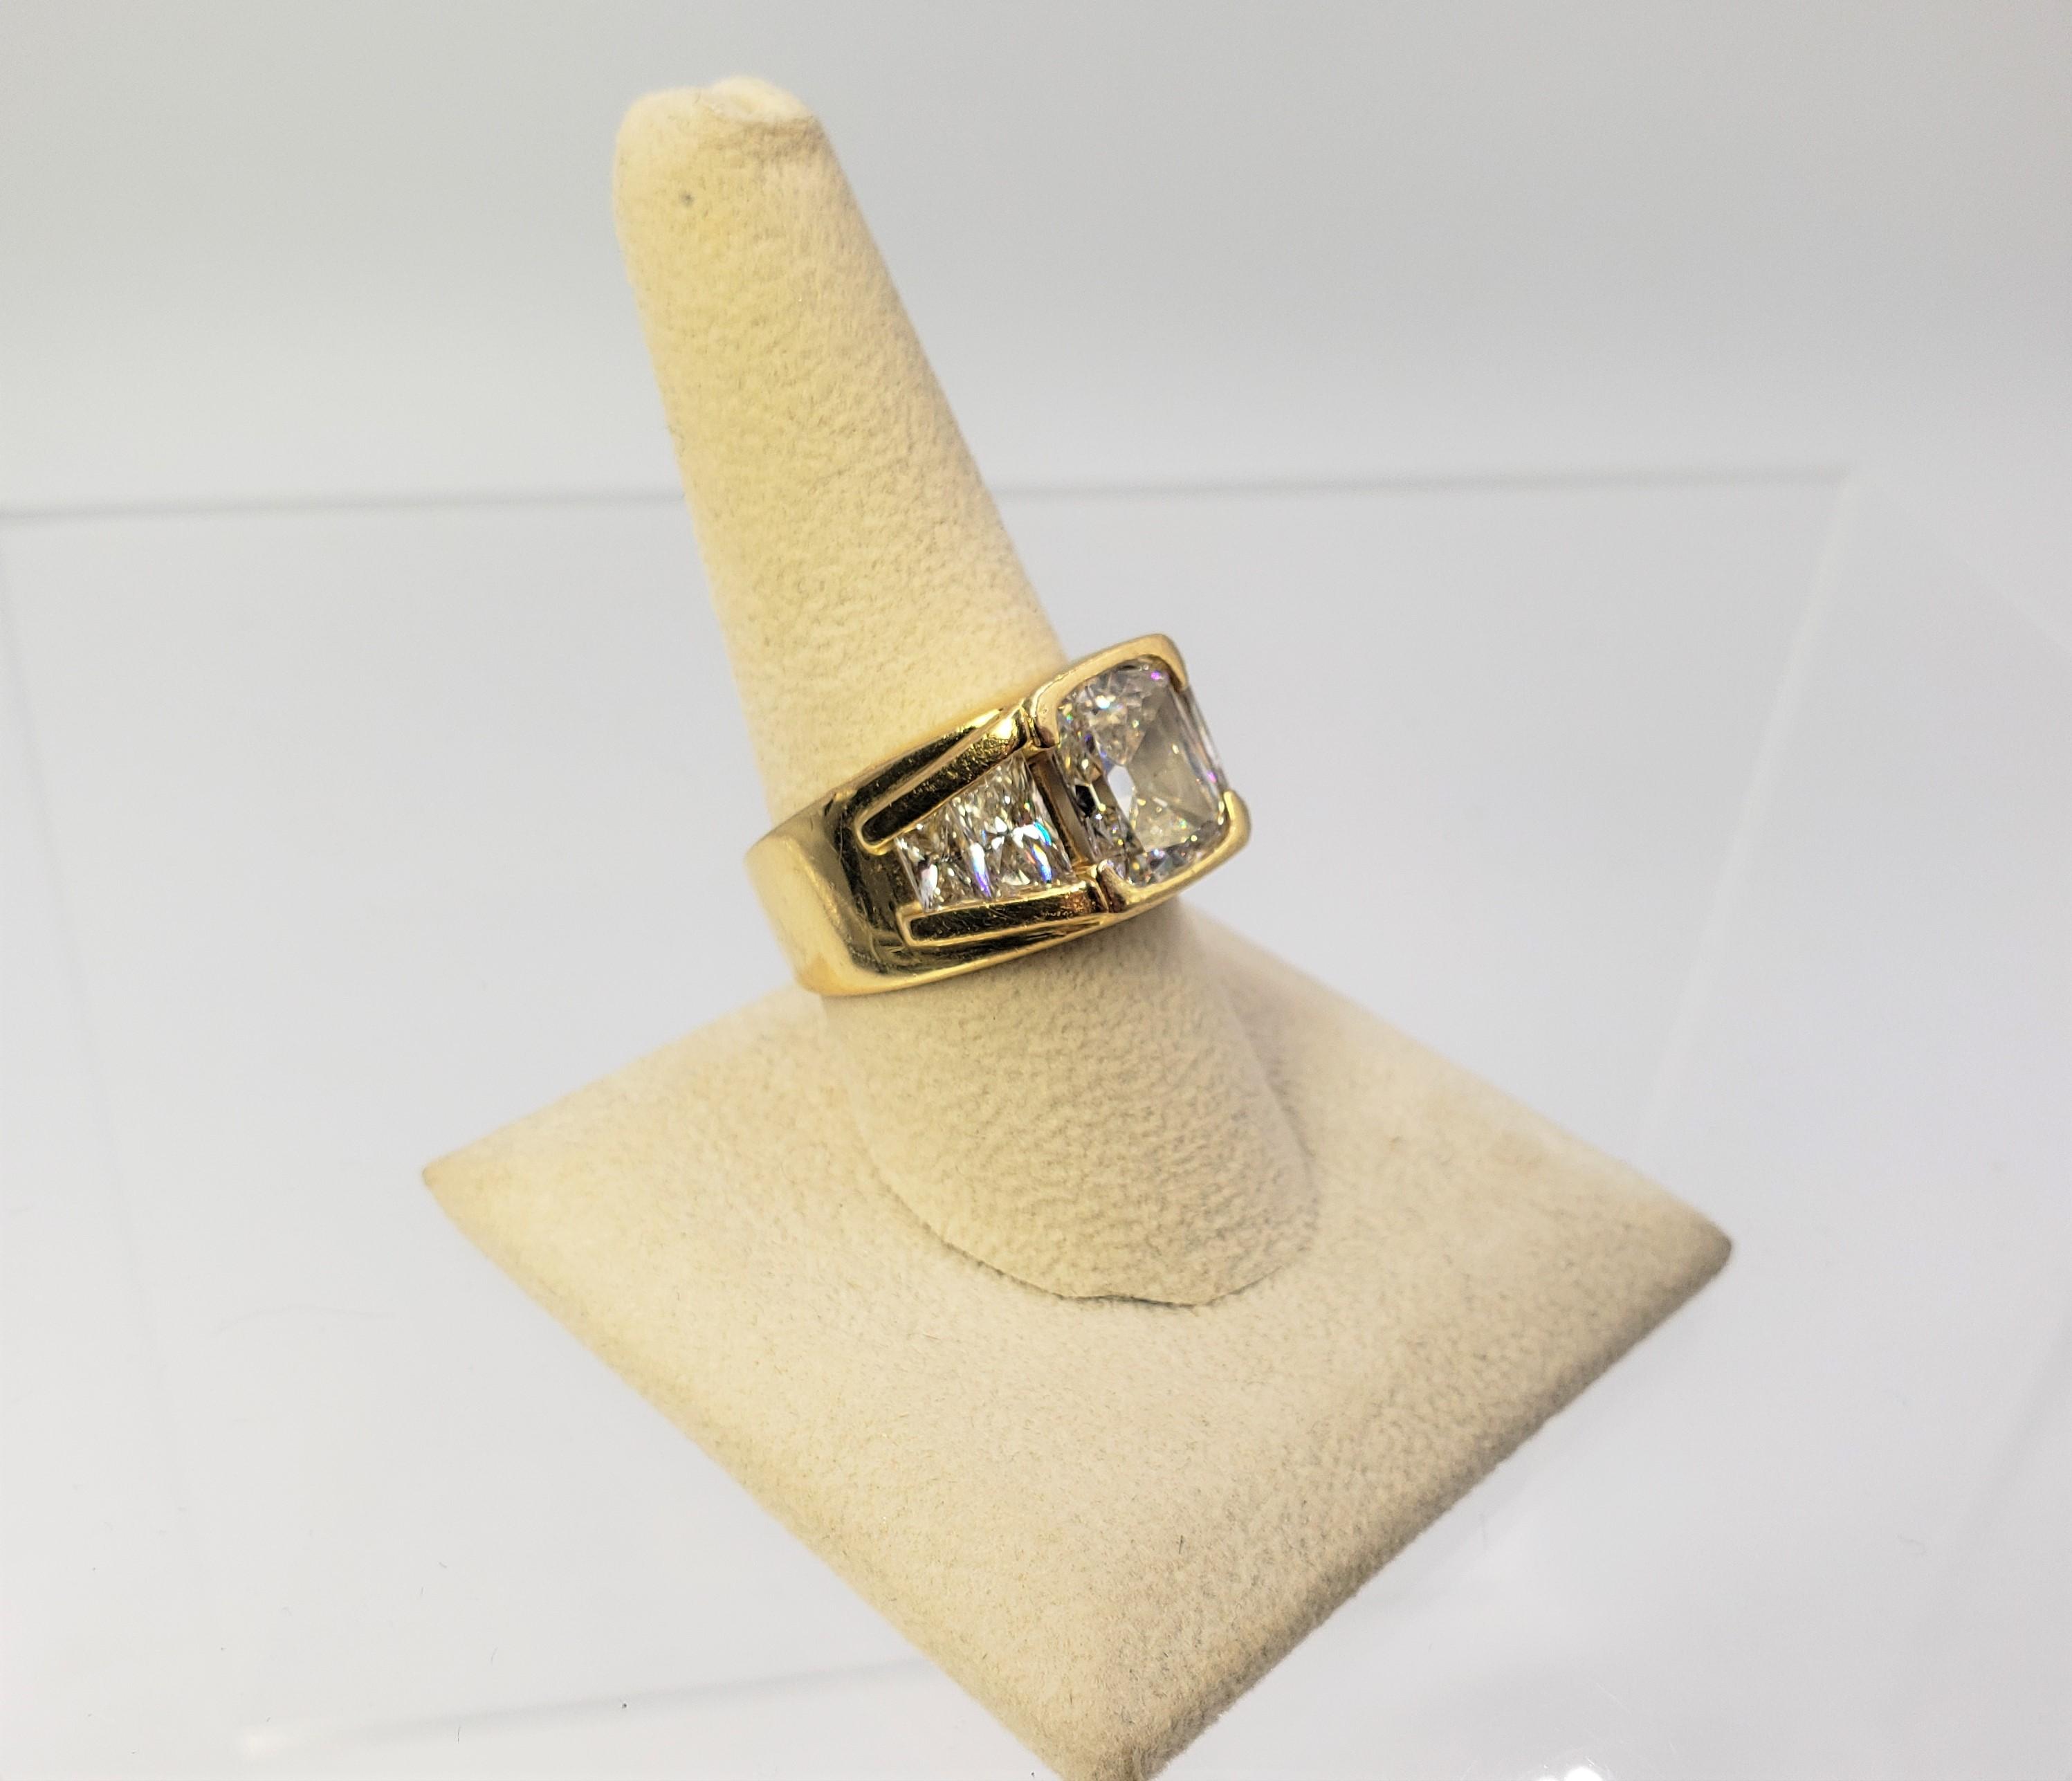 18KT YELLOW GOLD 5.06CT GIA CERTIFIED DIAMOND RING WITH TRAPEZOID CUT SIDE DIAMOND SETTING